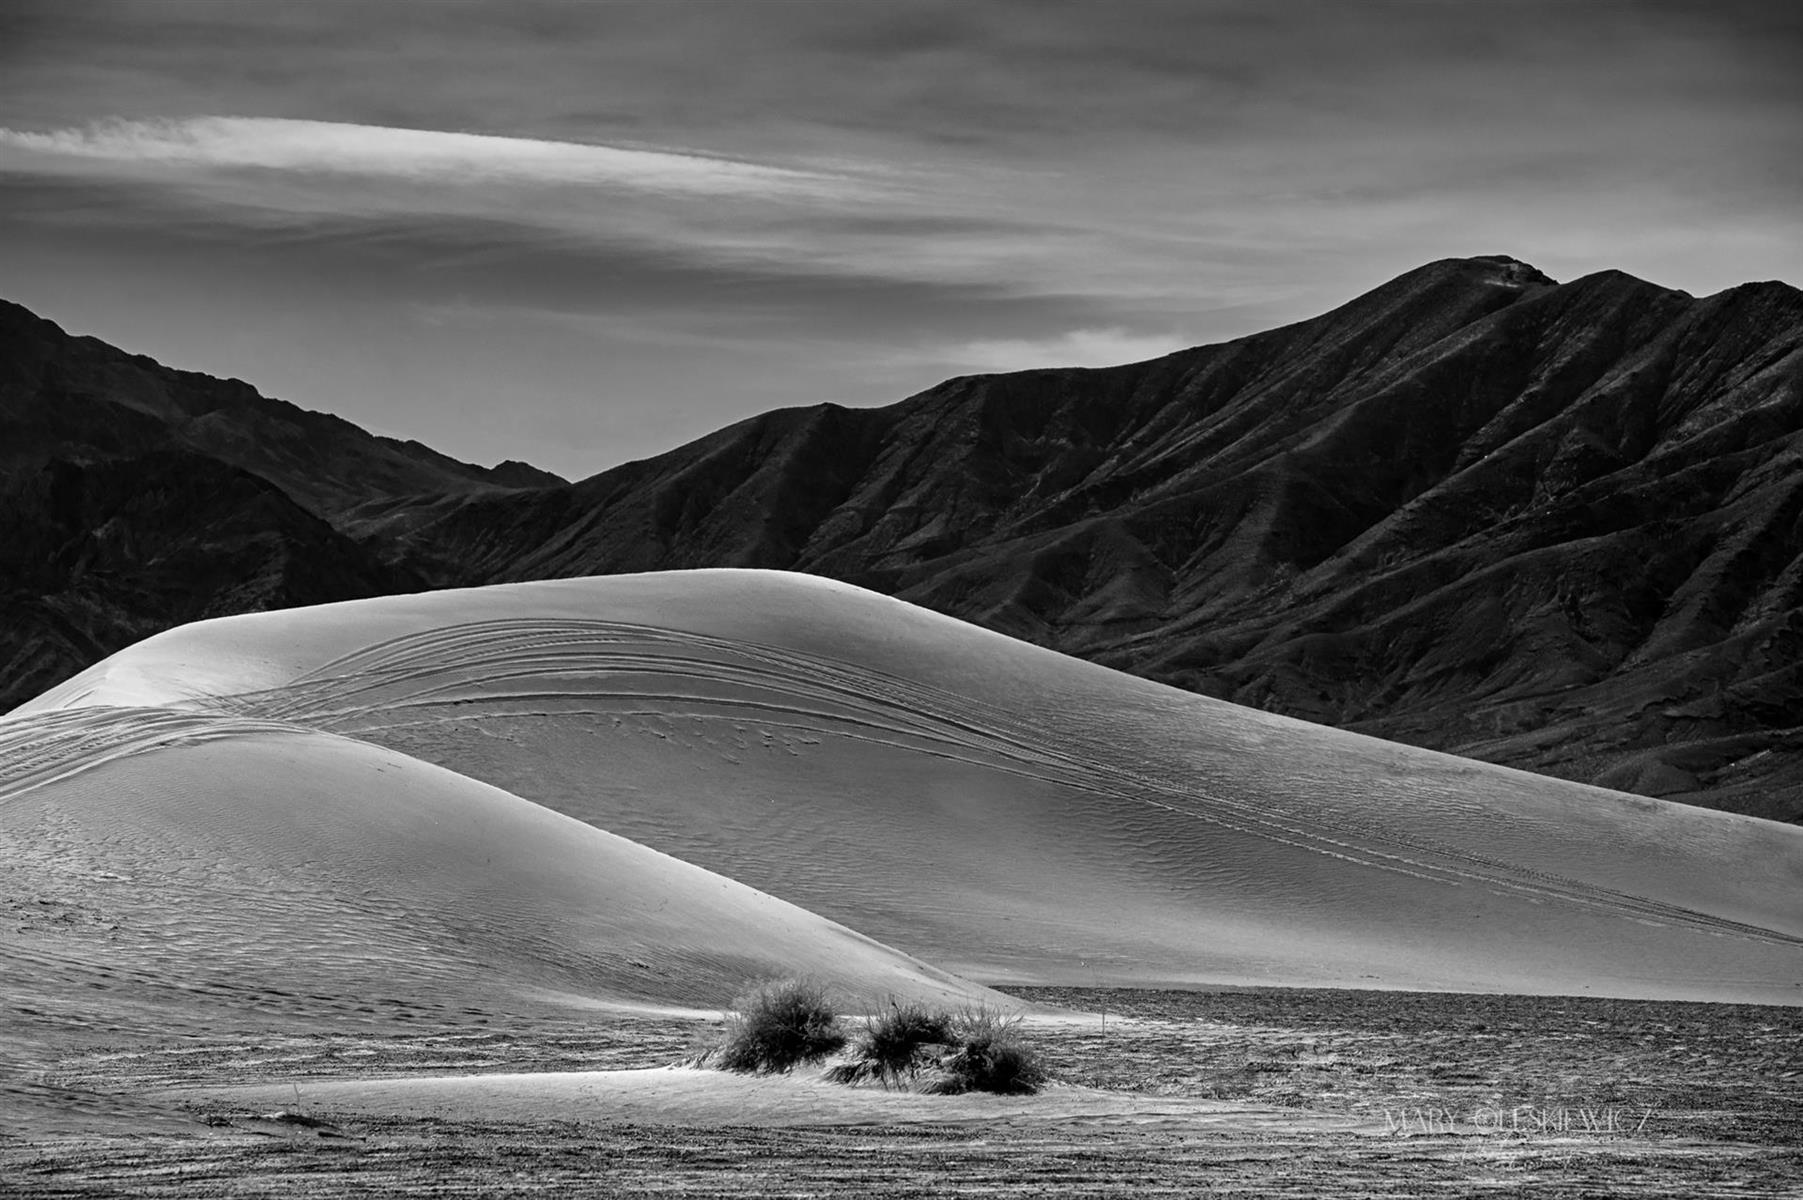 Dune Buggy Tracks, Death Valley - Honorable Mention